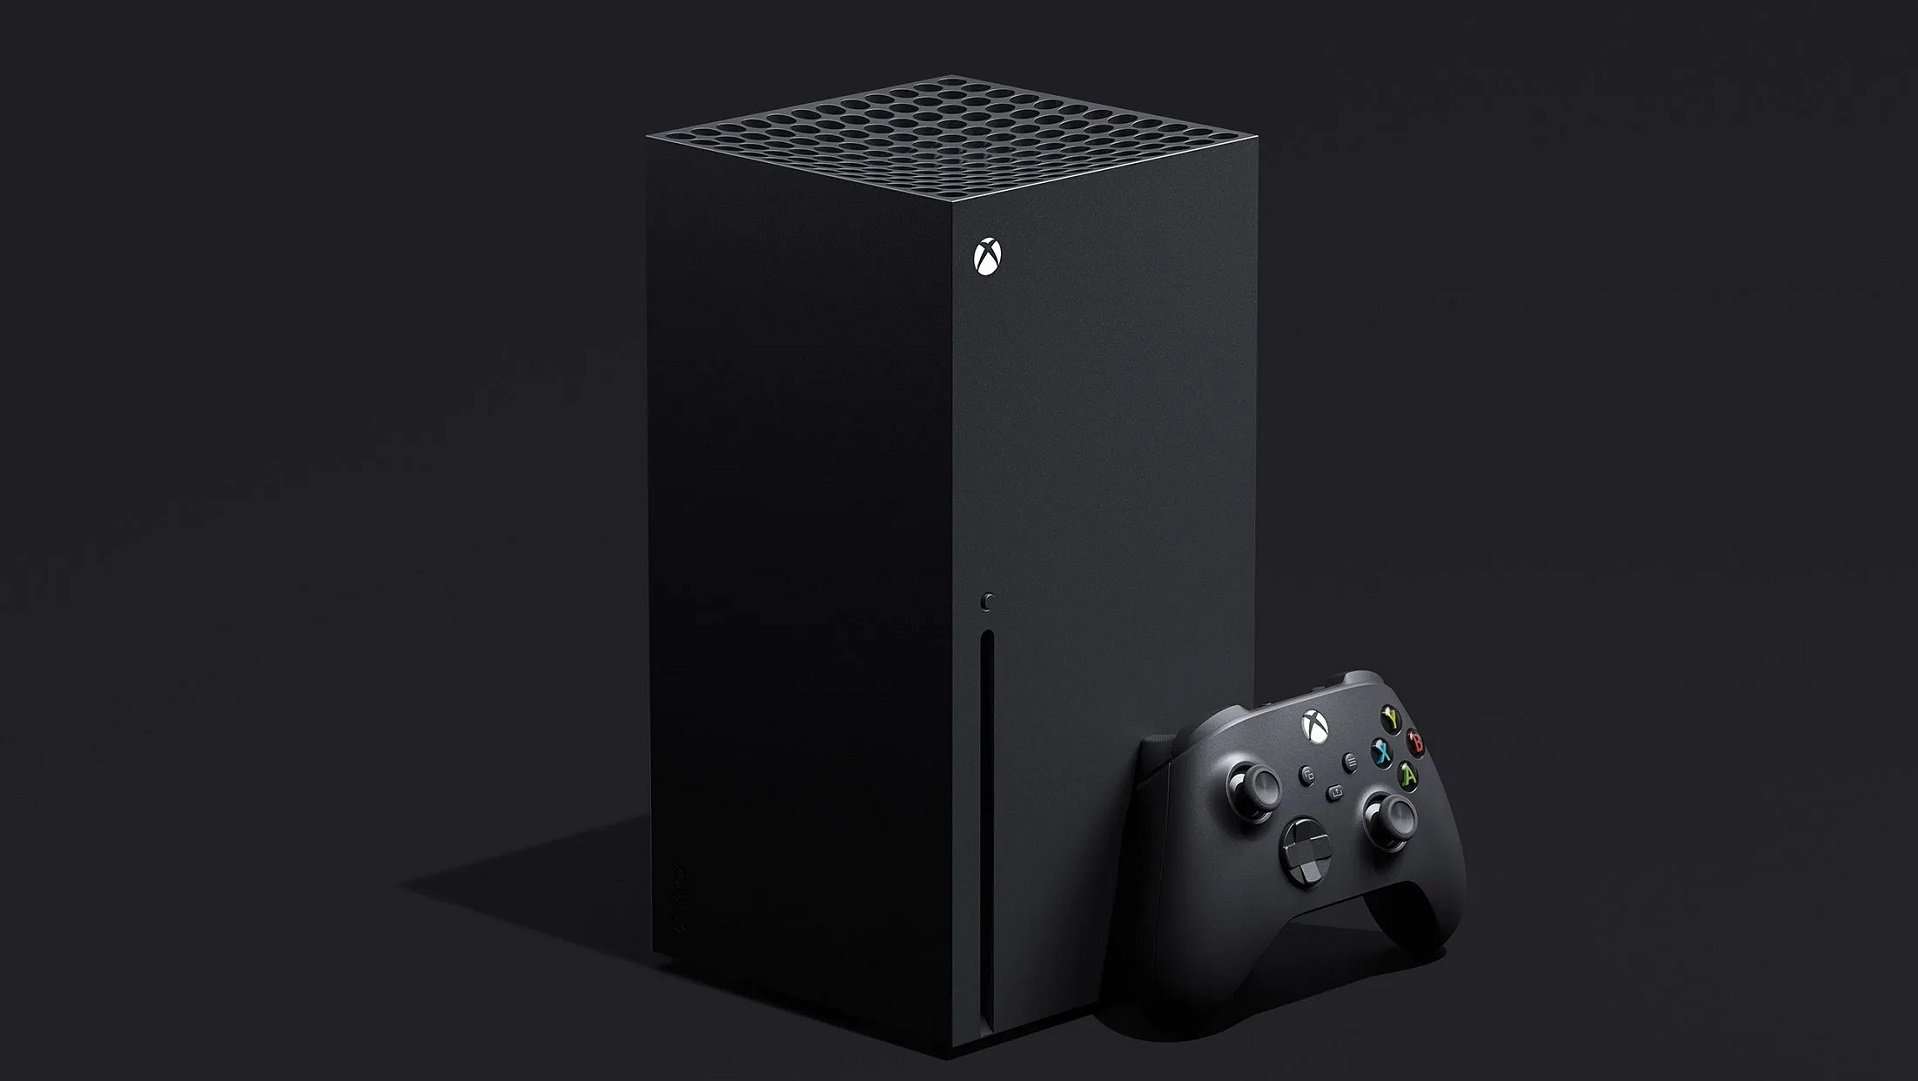 The Main Differences Between Xbox Series X and S